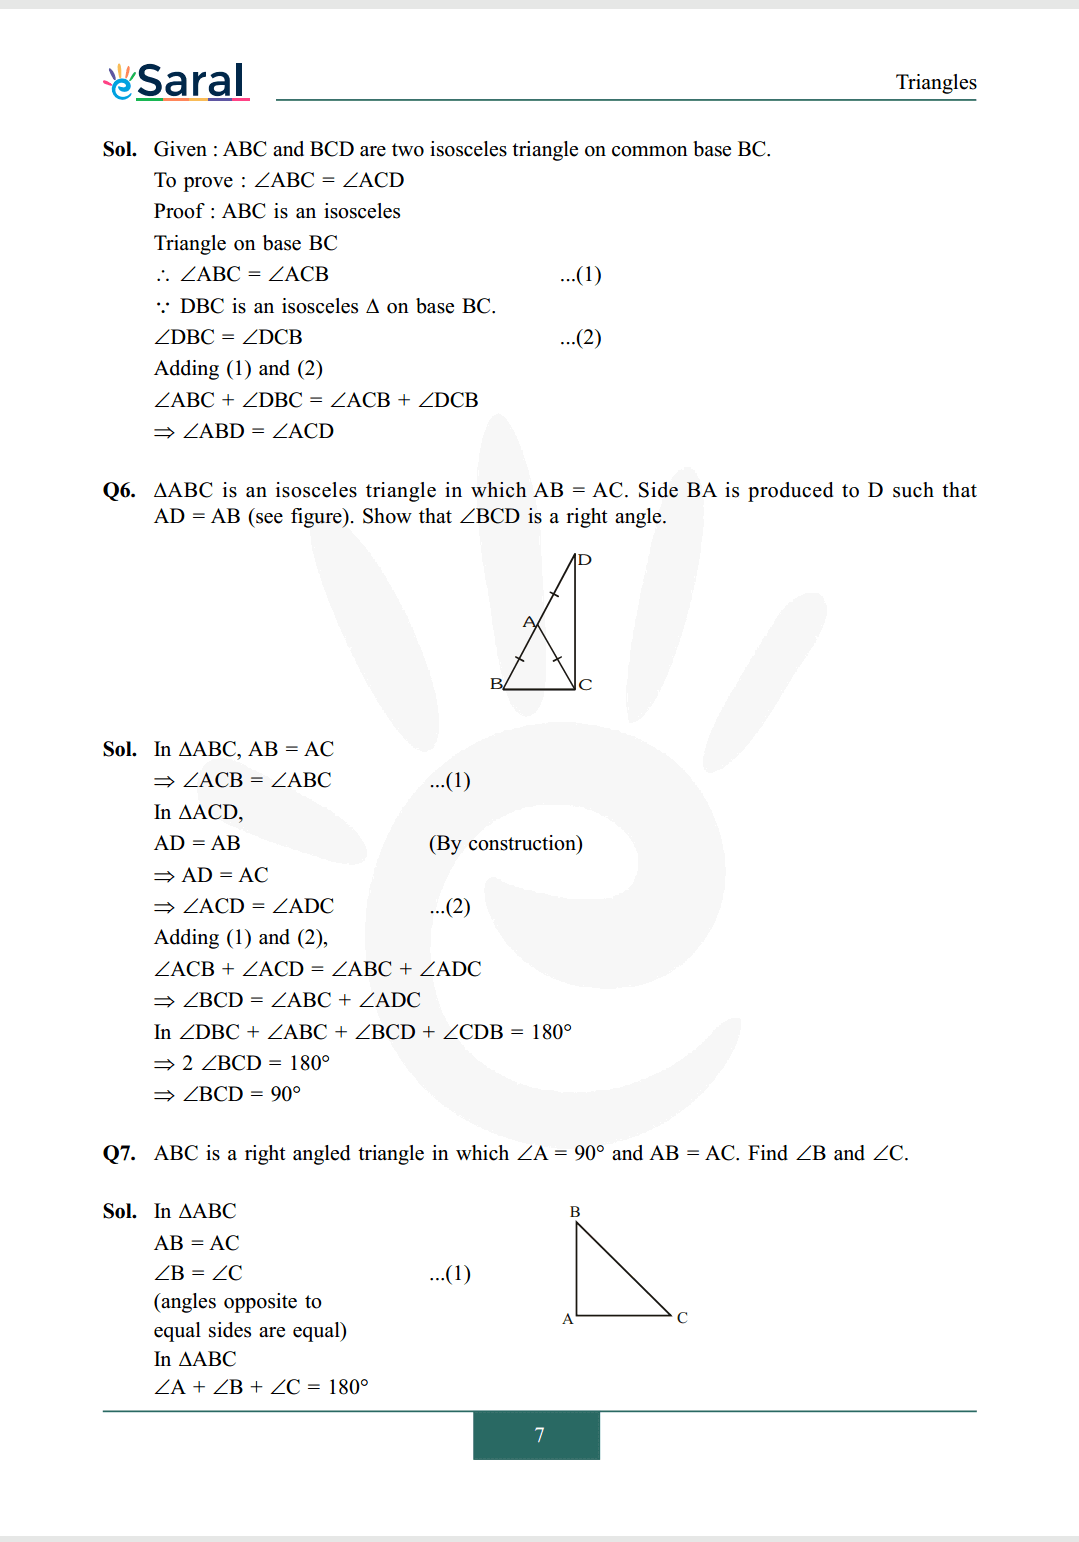 Class 9 maths chapter 7 exercise 7.2 solutions Image 3